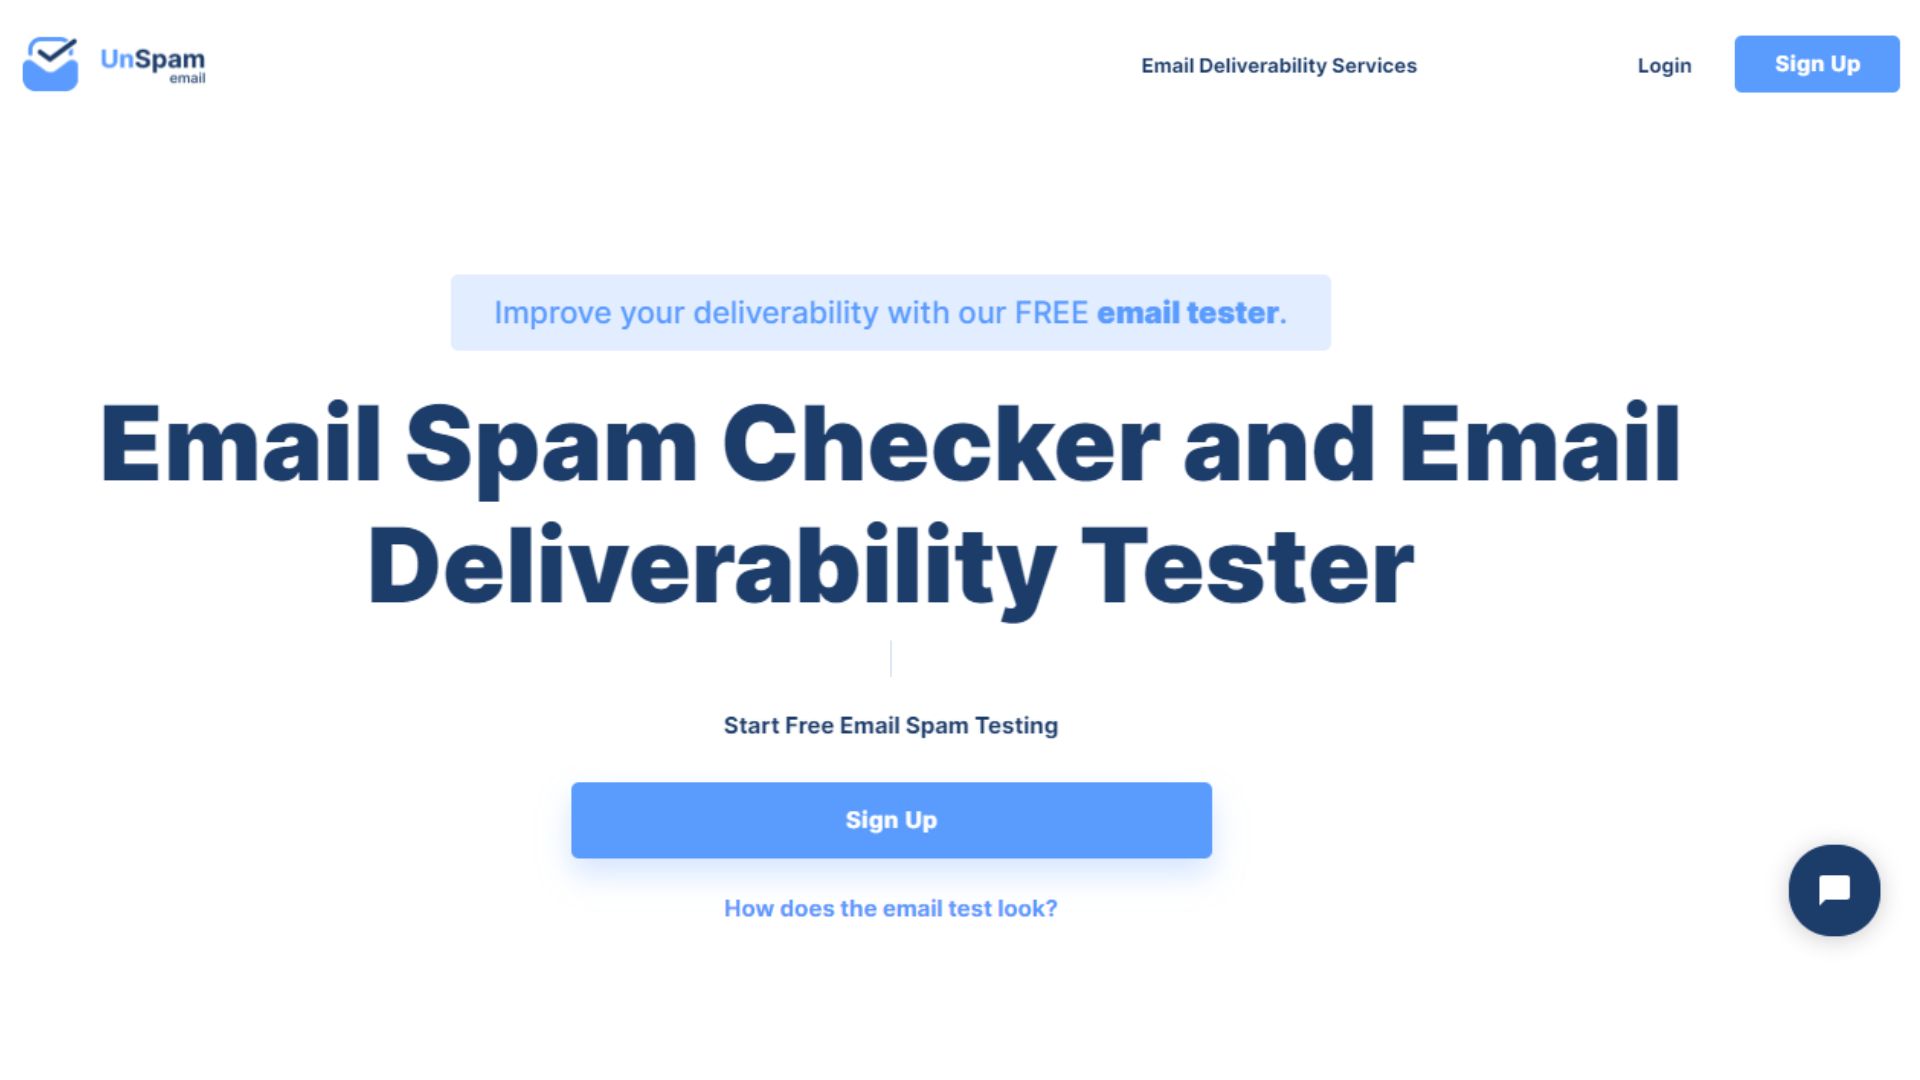 Webpage offering an email spam checker and deliverability tester service